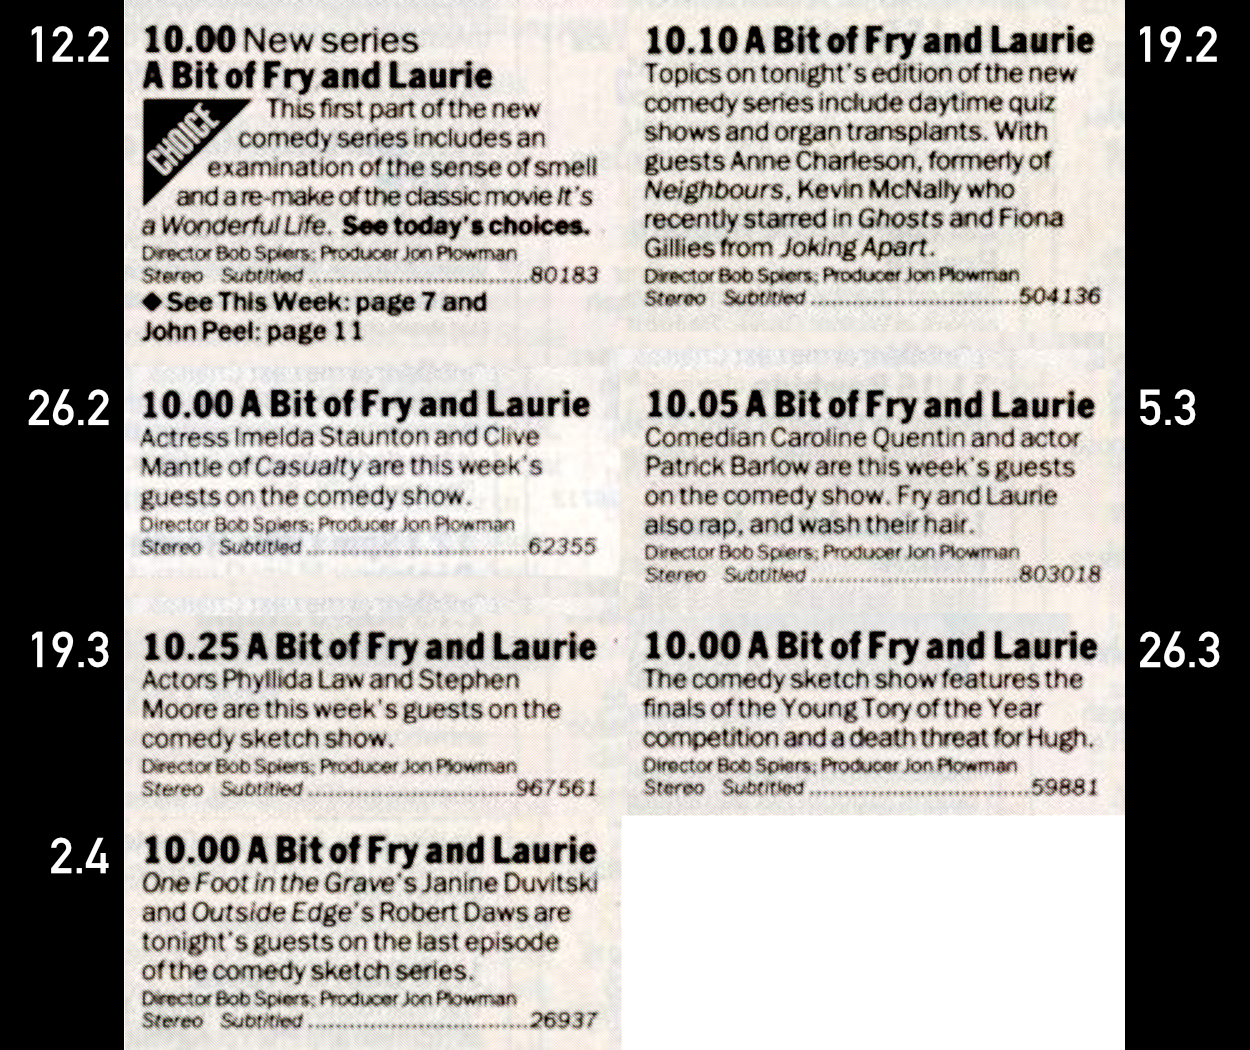 Fry and Laurie Radio Times listings for Series 4 - don't worry, all the relevant information here is repeated in the body text